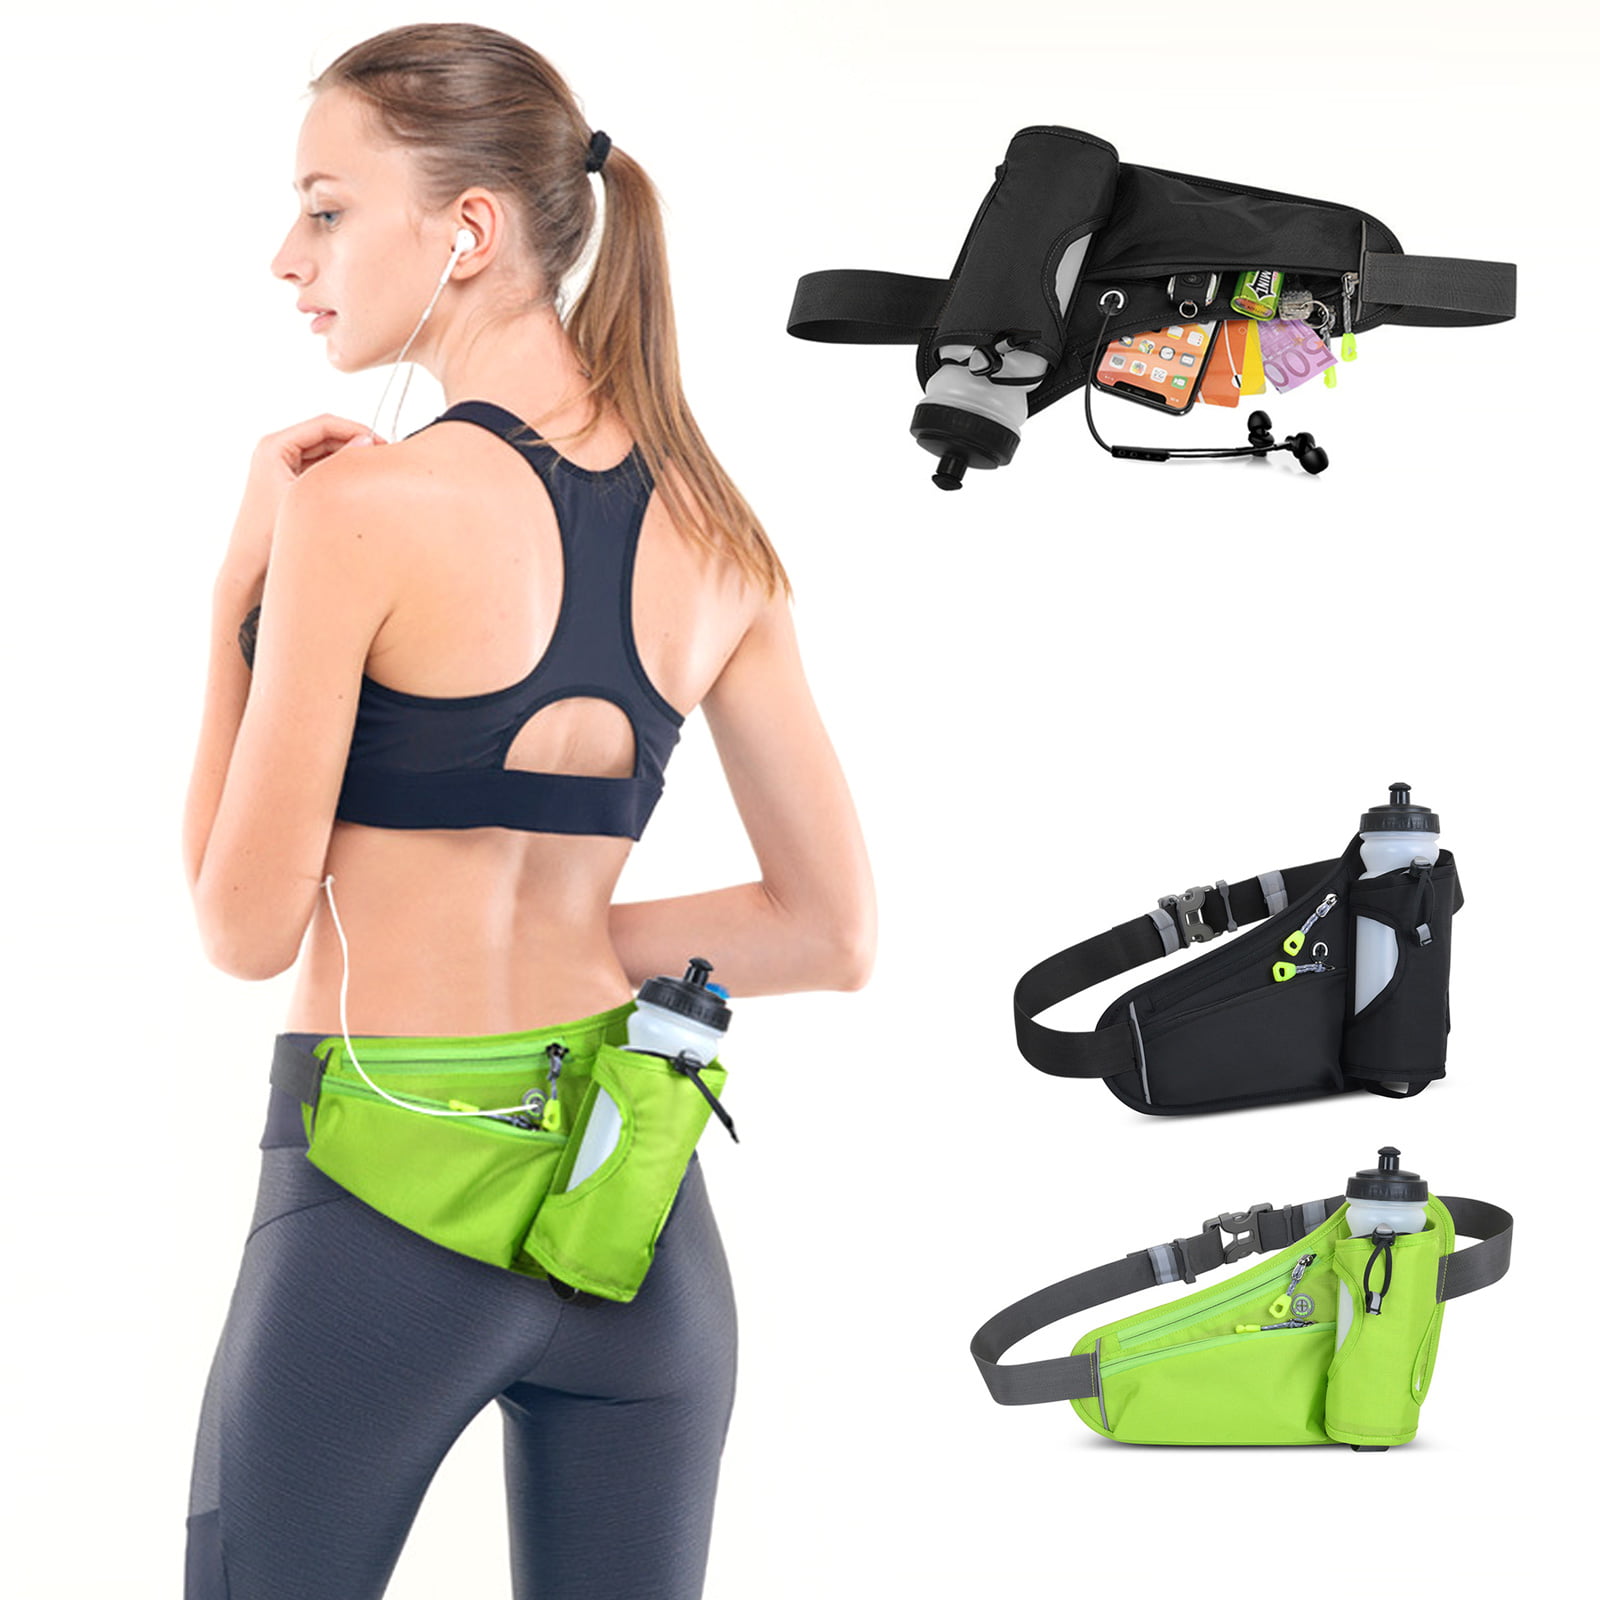 HAISSKY Running Waist Belt with Water Bottle Holder Waterproof Sports Waist Pack with Reflective Strip for Jogging Running Walking Cycling Hiking Fit for Men and Women 